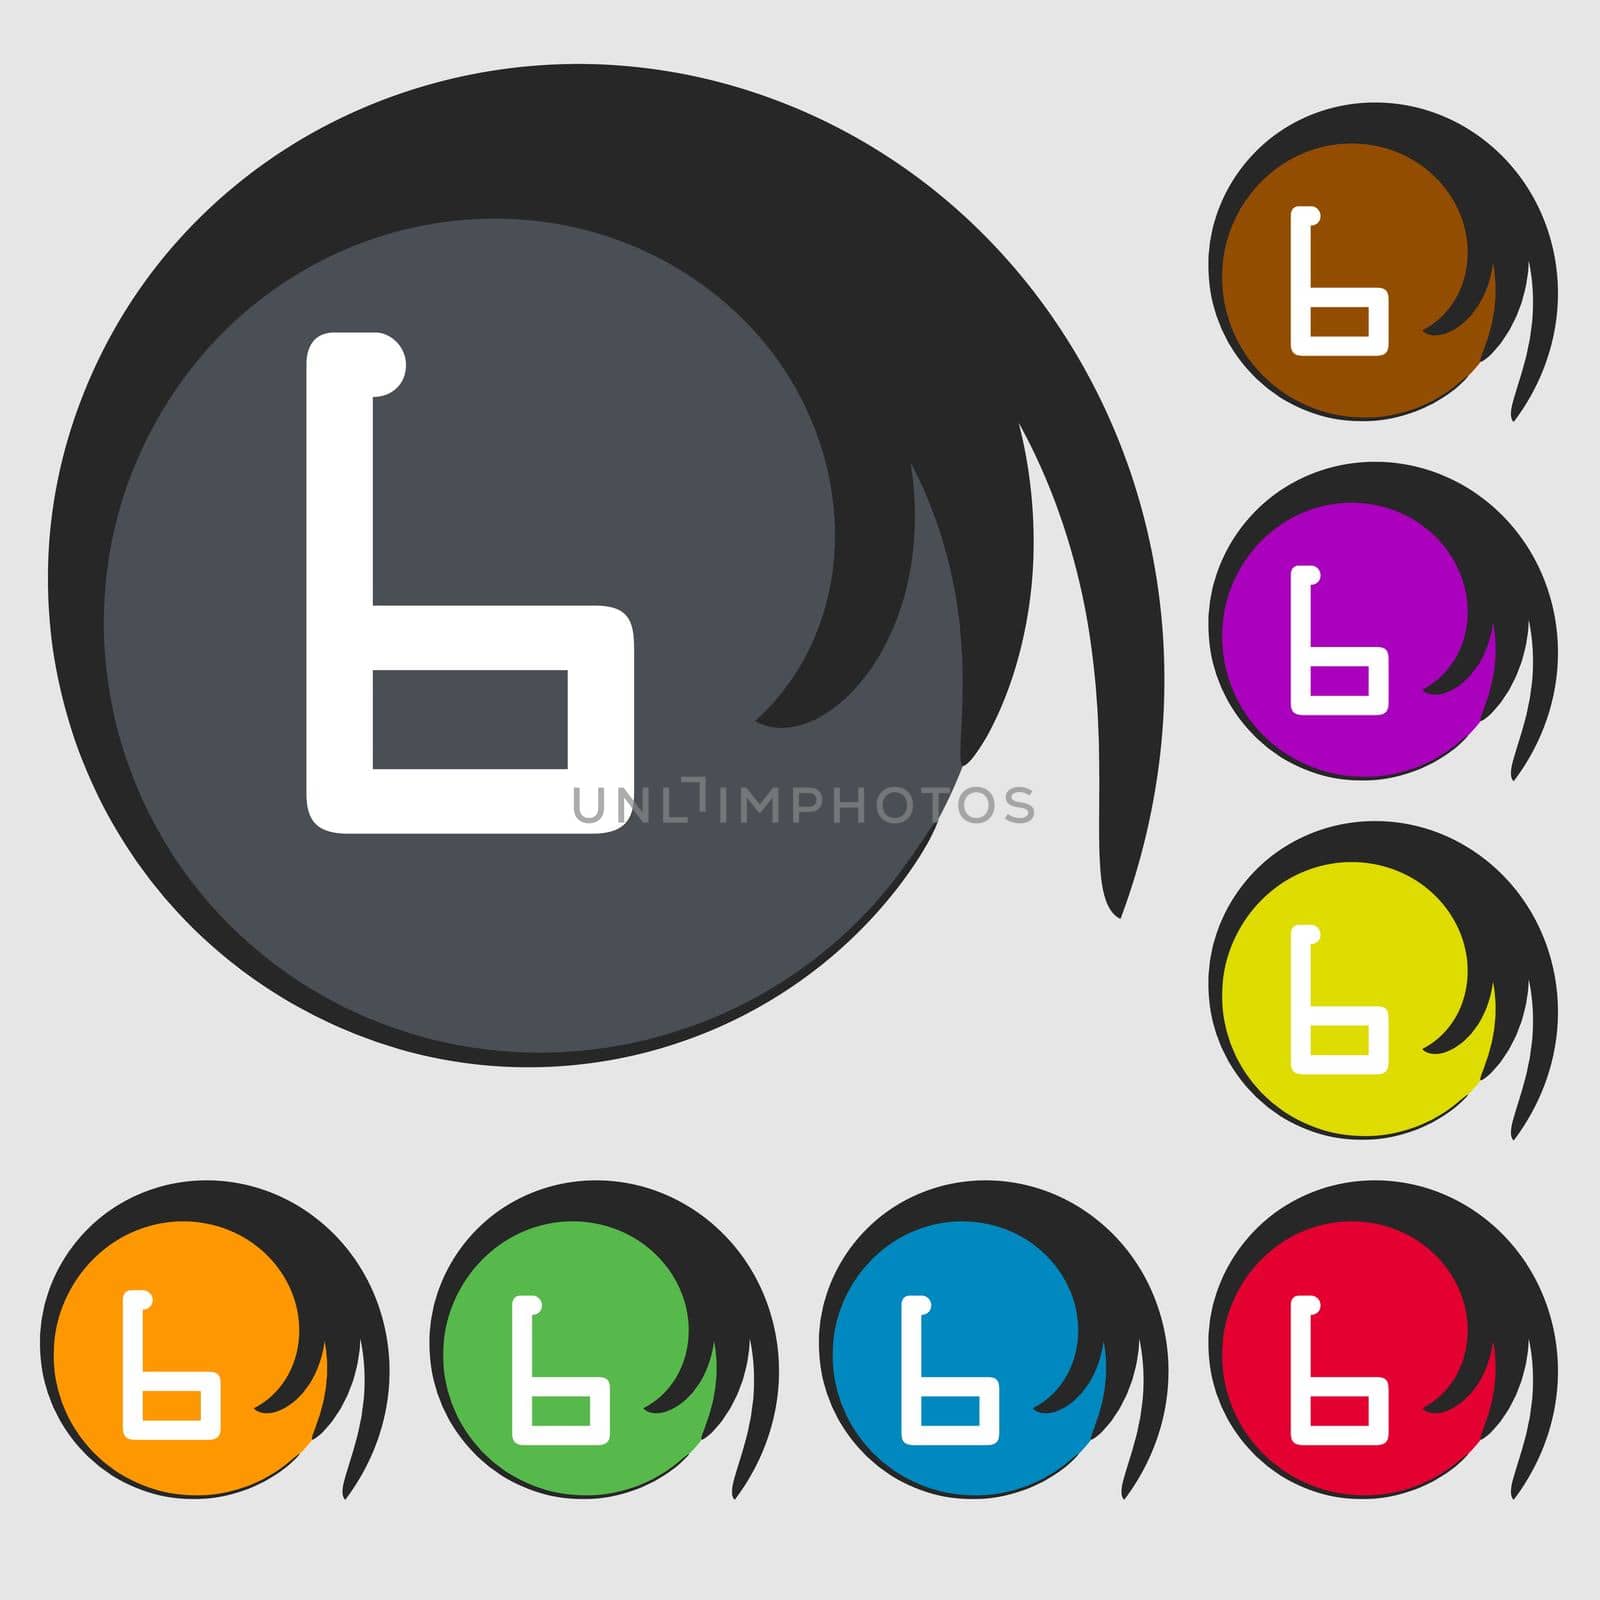 number six icon sign. Symbols on eight colored buttons. illustration